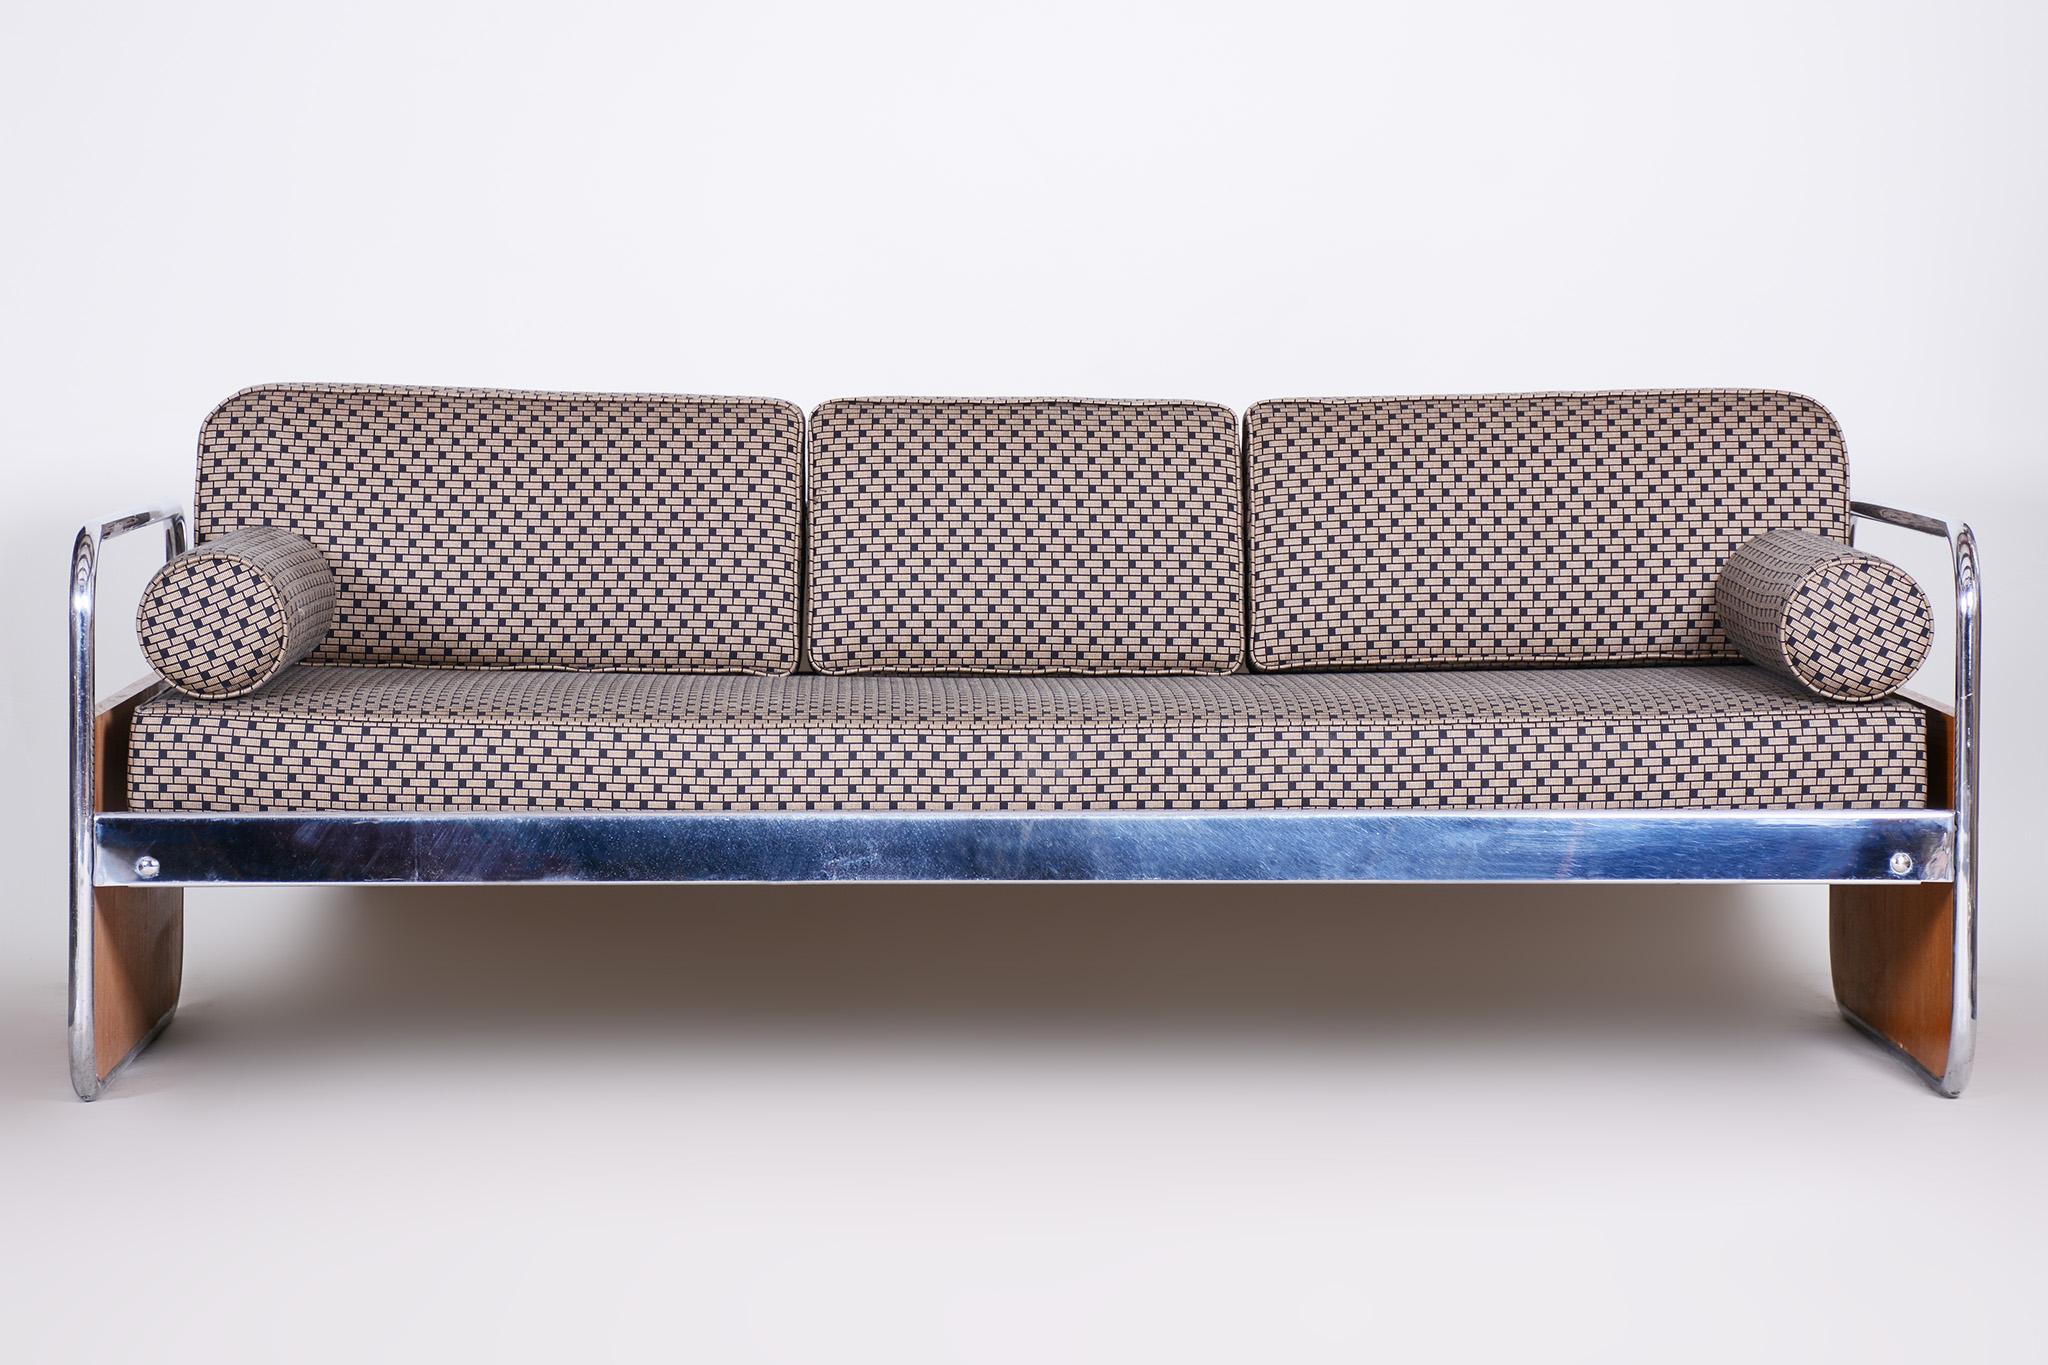 20th Century 1930s Bauhaus Sofa Made by Hynek Gottwald, Czechia, Restored and Reupholstered